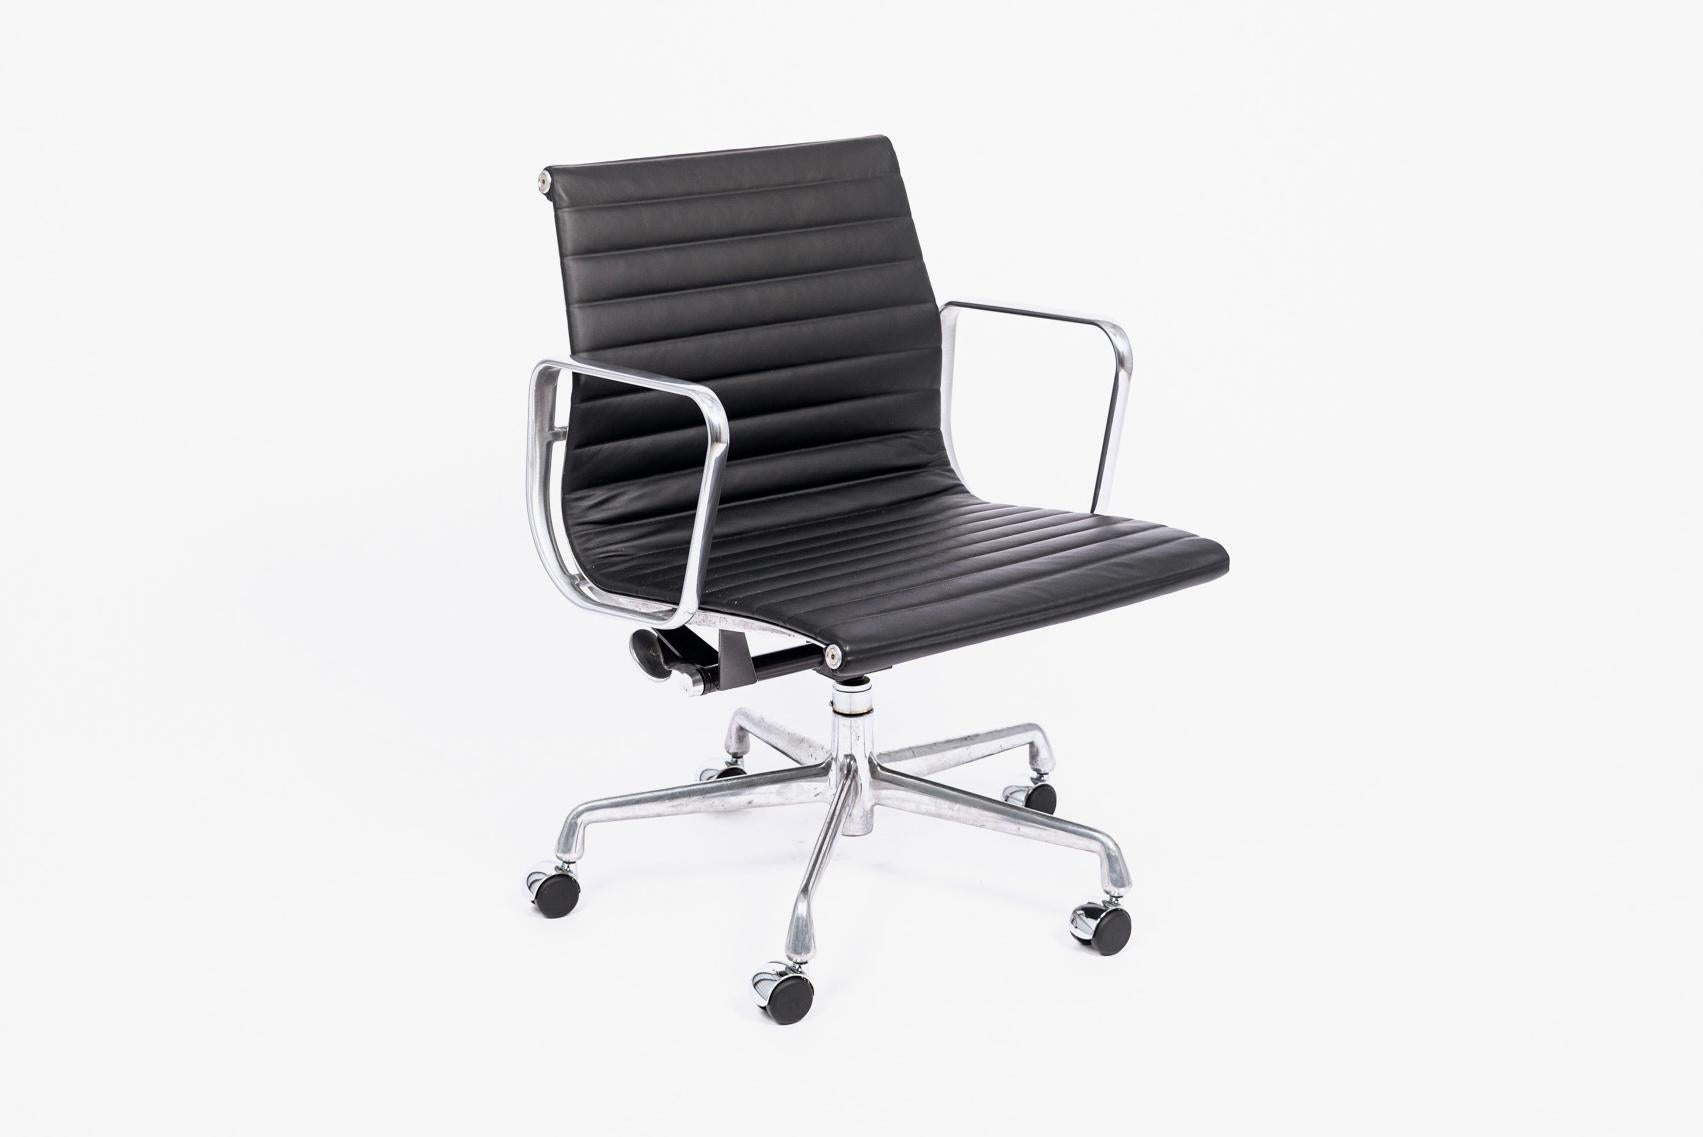 The Aluminum Group Management office chair designed by Charles & Ray Eames for Herman Miller is from the Eames Aluminum Group Collection. These distinctive chairs resulted from the Eames's experimentation with aluminum, which became more affordable